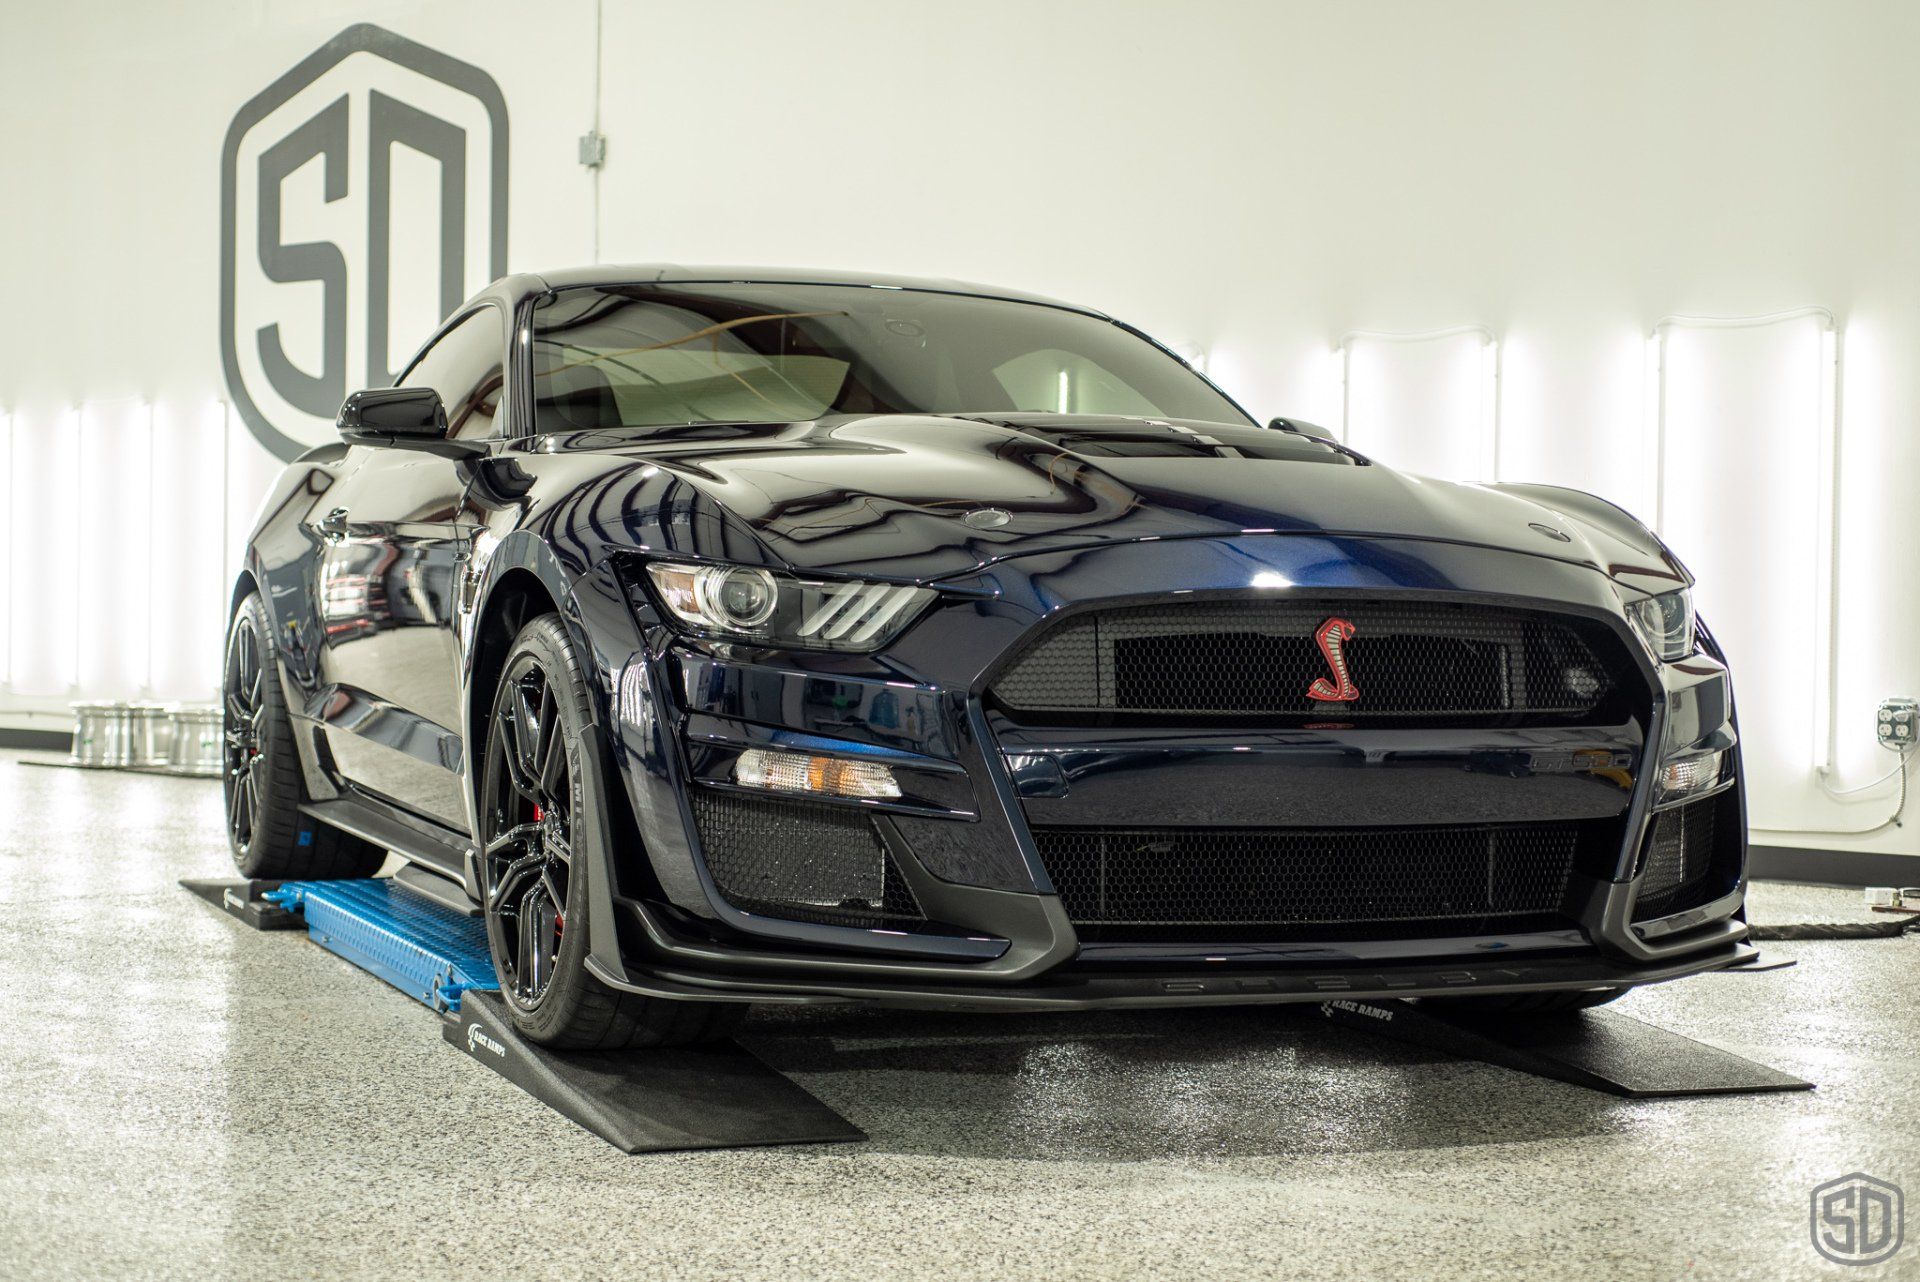 2021 Mustang GT500 Carbon Revolution wheels polished and then coated Modesta BC-06. We wrapped the new carbon fiber hood vents and rear wing with Xpel Paint protection film Orlando FL